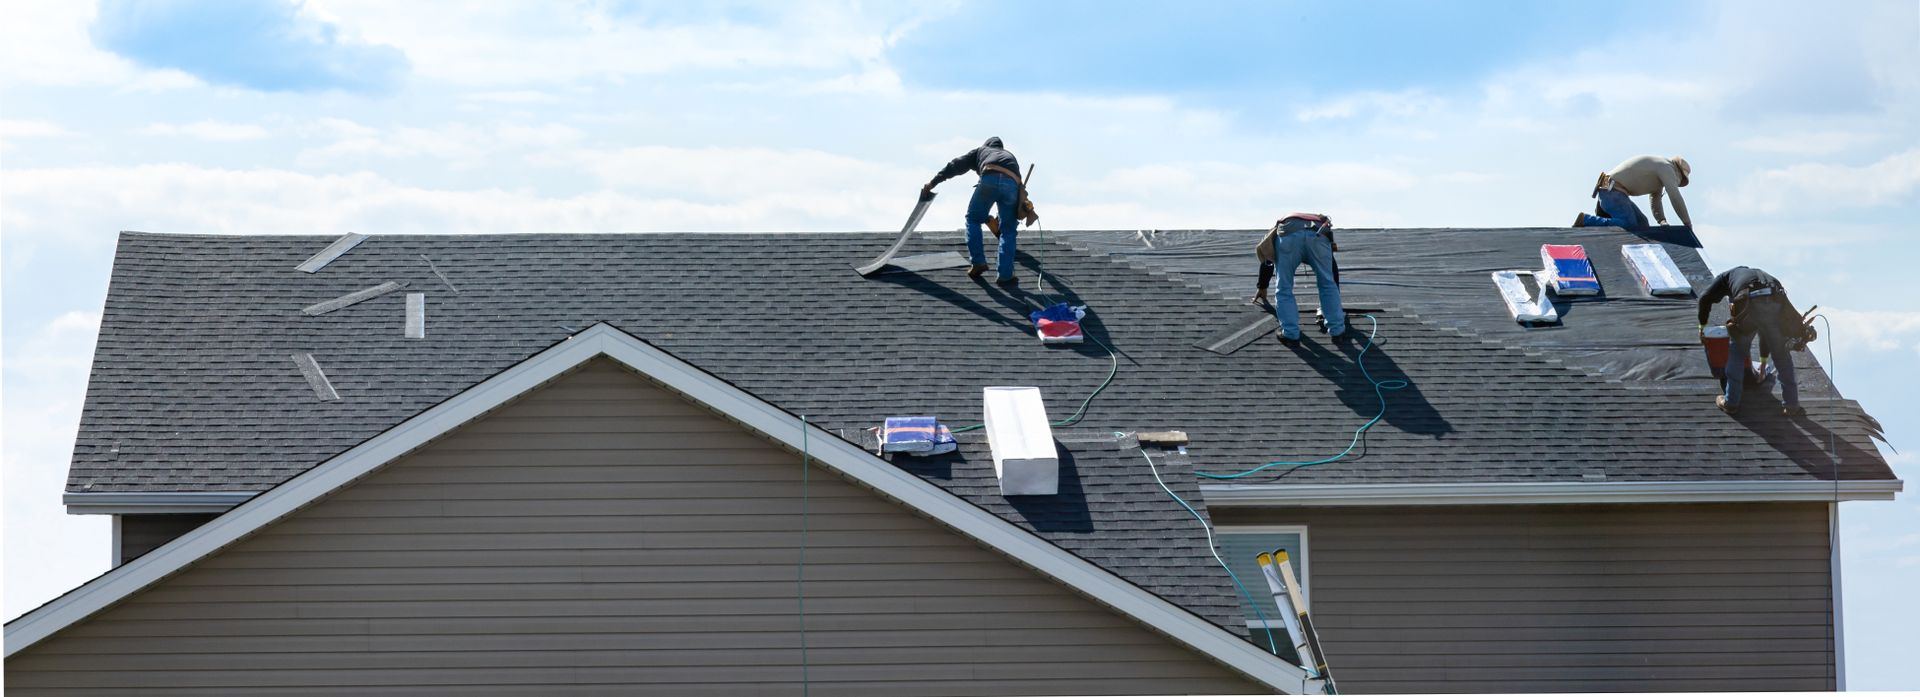 Choose the Right Roofing Contractor